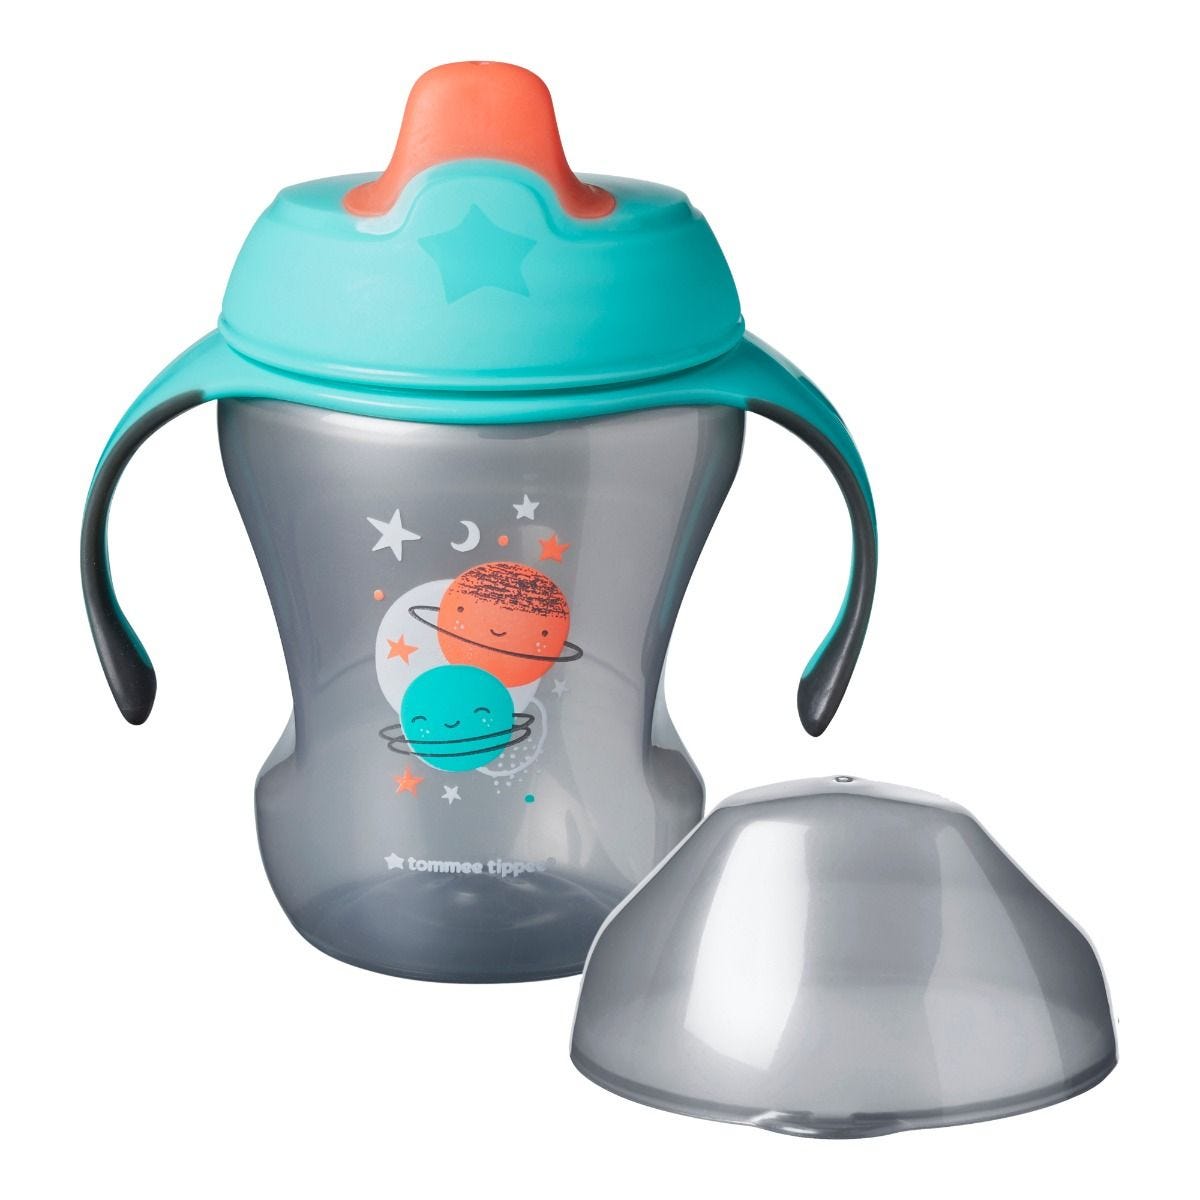 Unicorn Tommee Tippee Training Sippee Cup 6m+